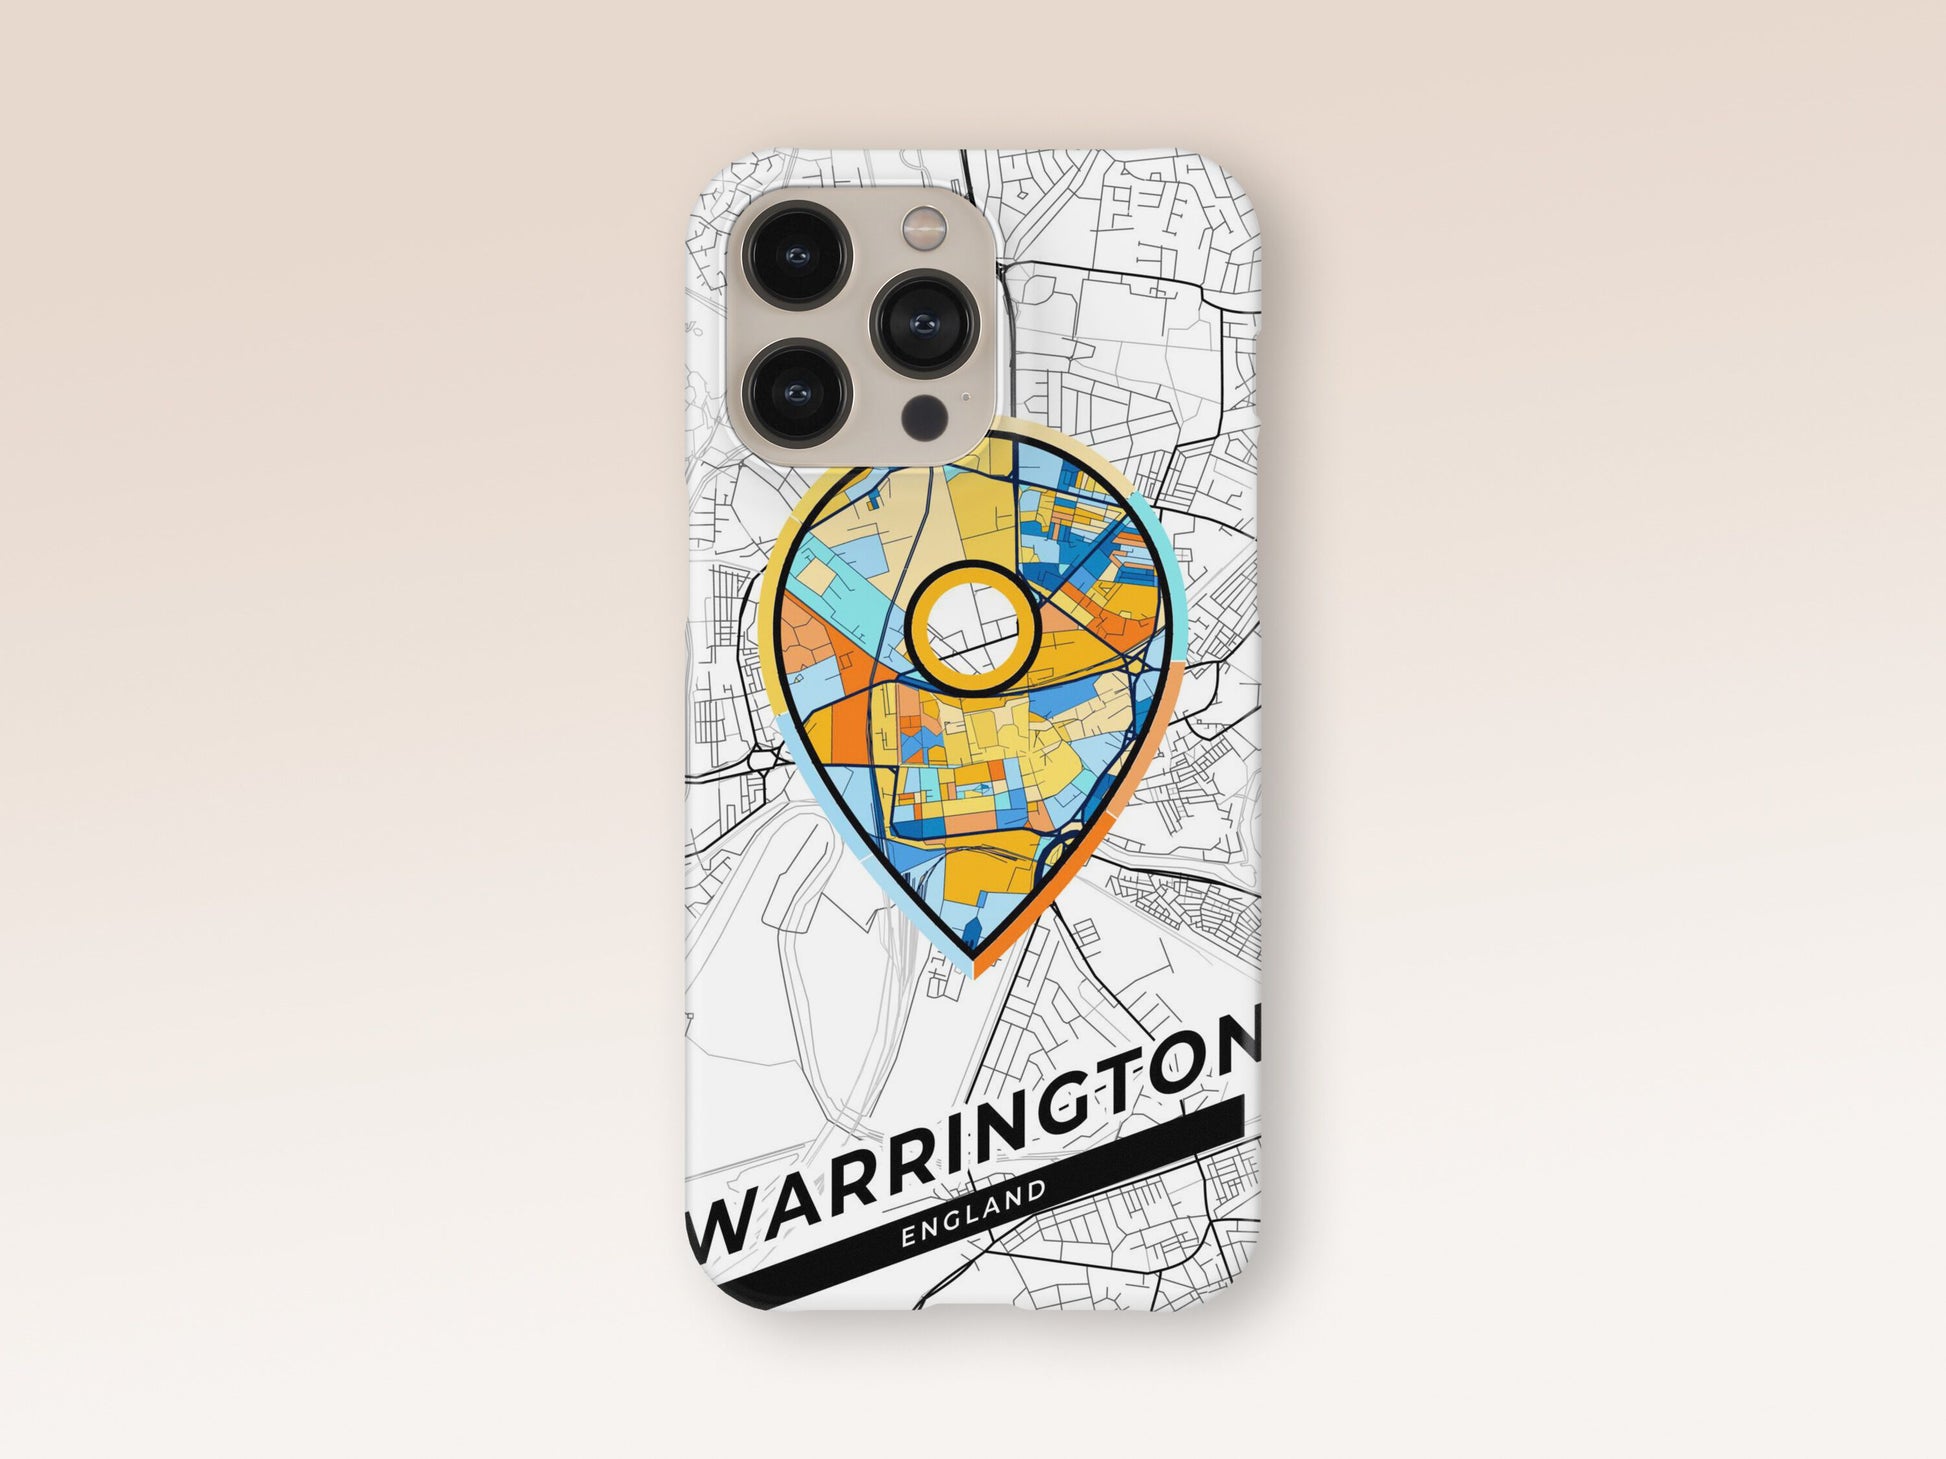 Warrington England slim phone case with colorful icon. Birthday, wedding or housewarming gift. Couple match cases. 1